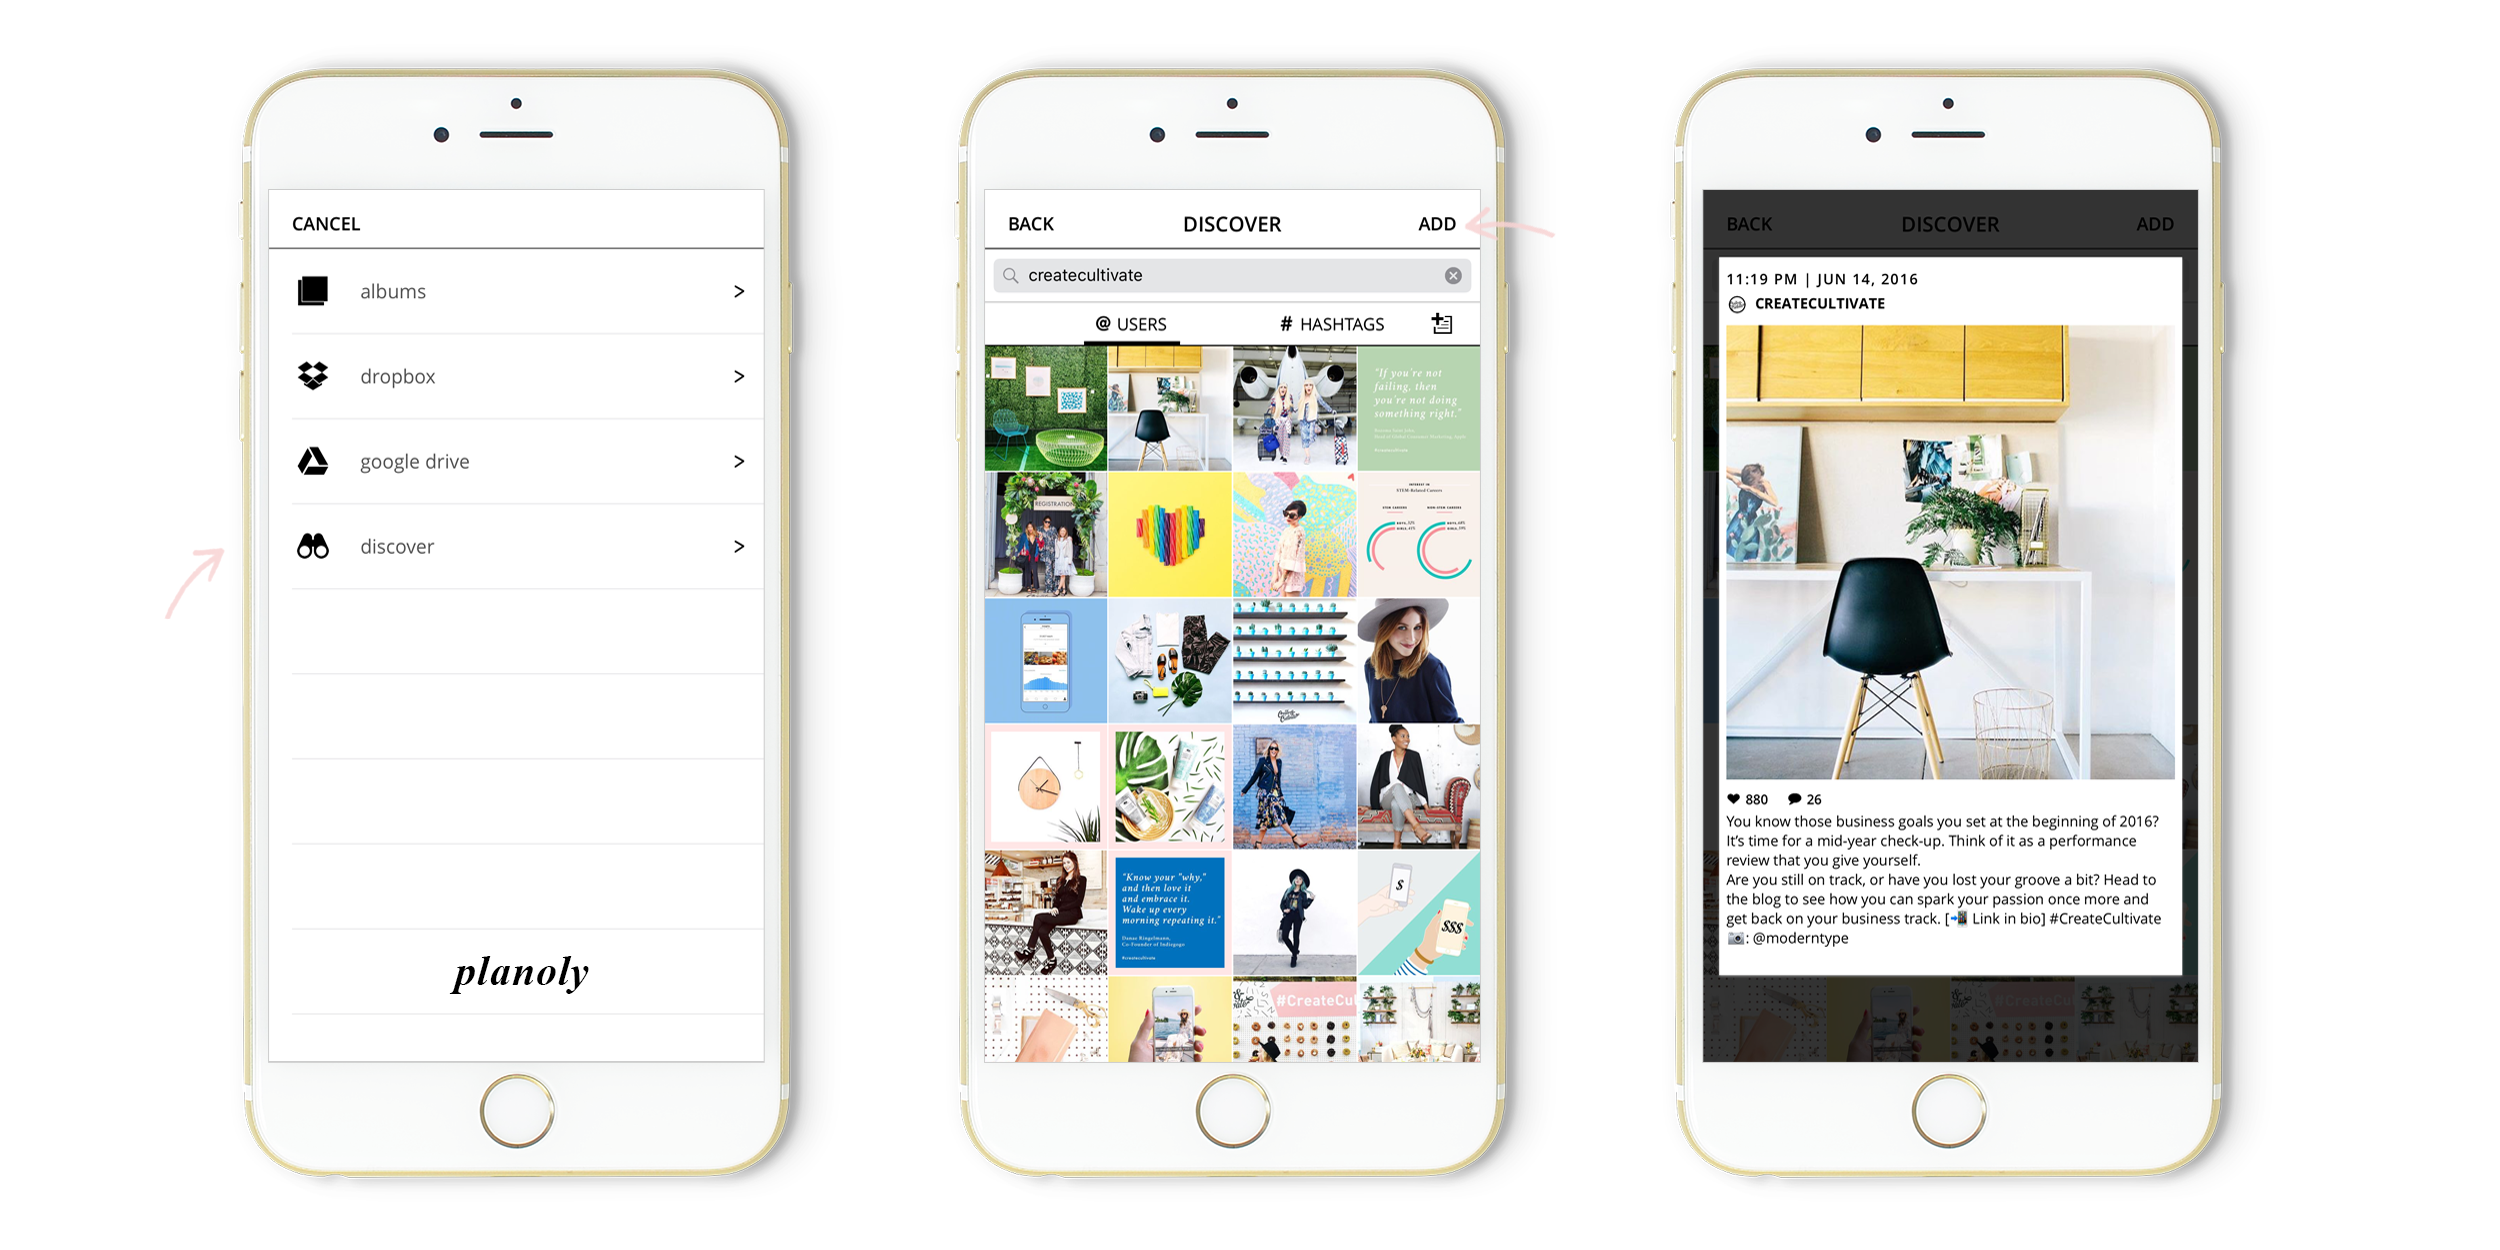 Discover user generated Instagram content on PLANOLY iOS app